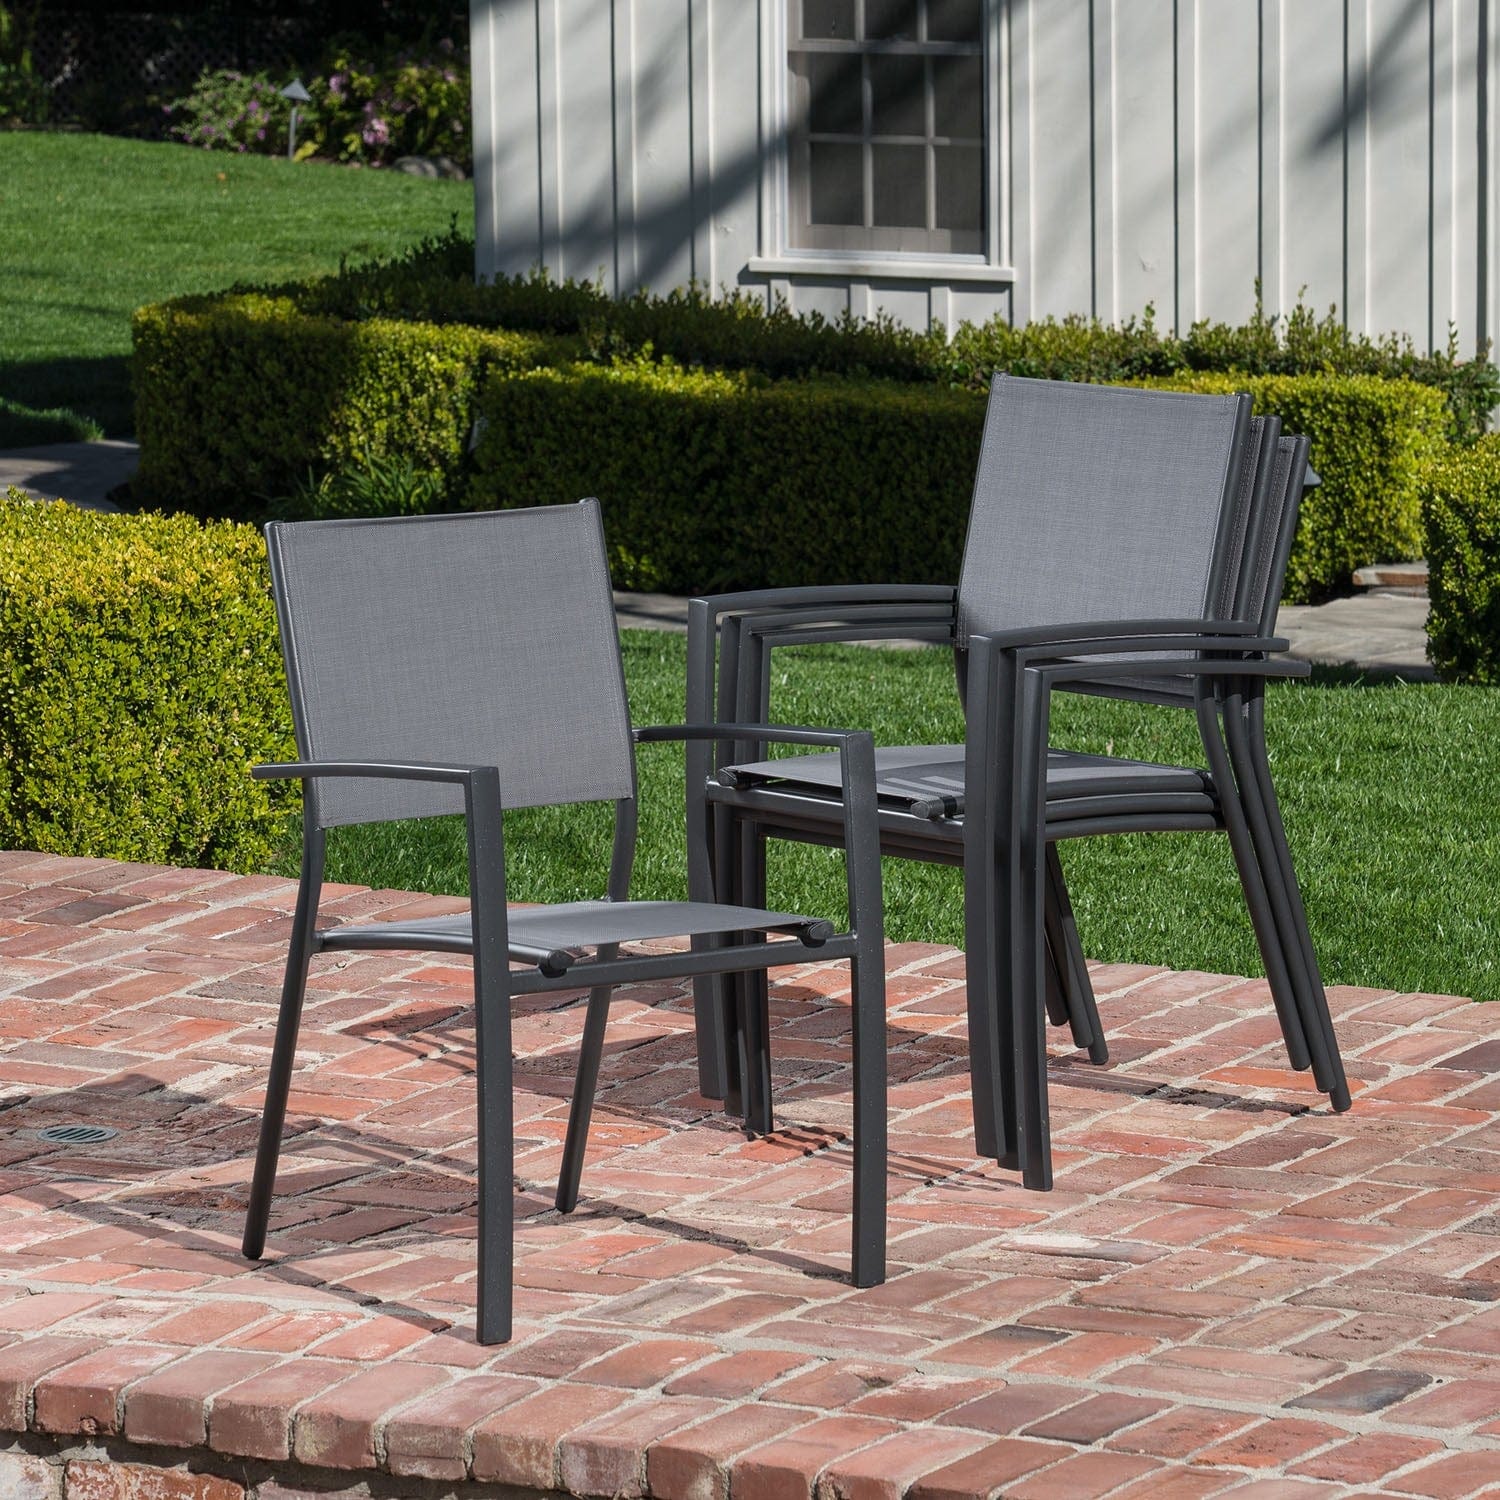 Hanover Outdoor Dining Set Hanover - Naples 9pc Dining Set: 8 Sling Back Chairs, 1 Aluminum Table